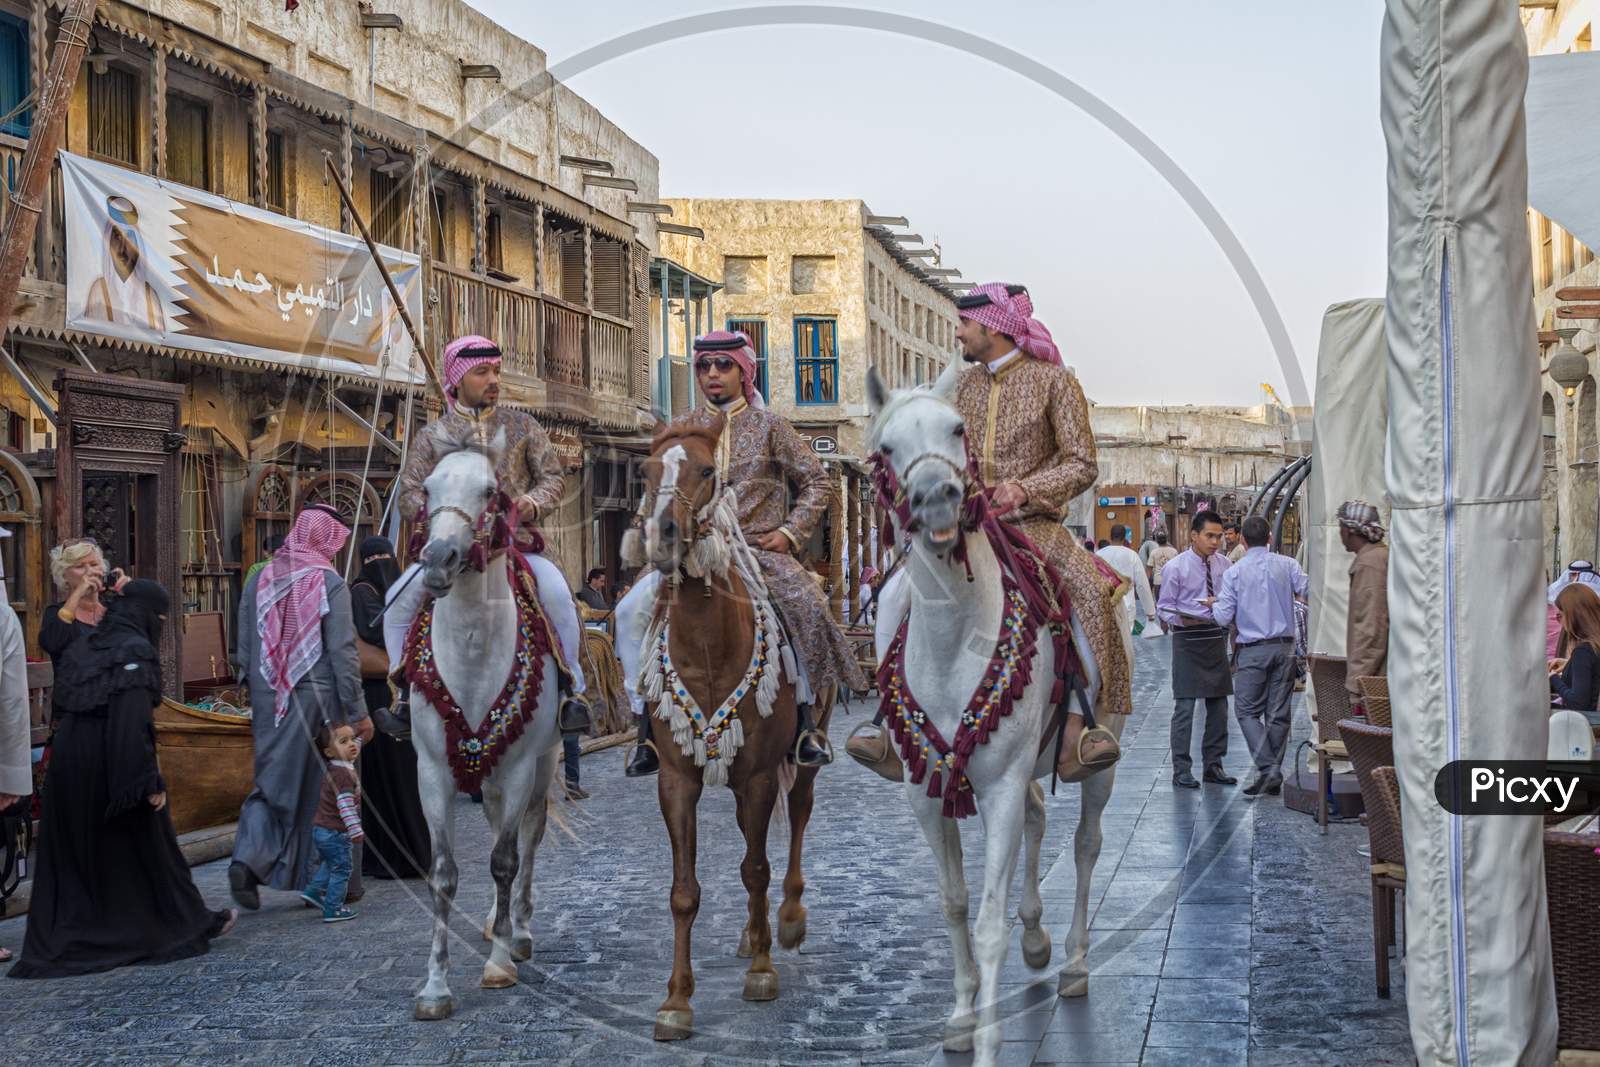 Souk Waqif in Doha Qatar main street day light view with traditional guards riding horses and people walking